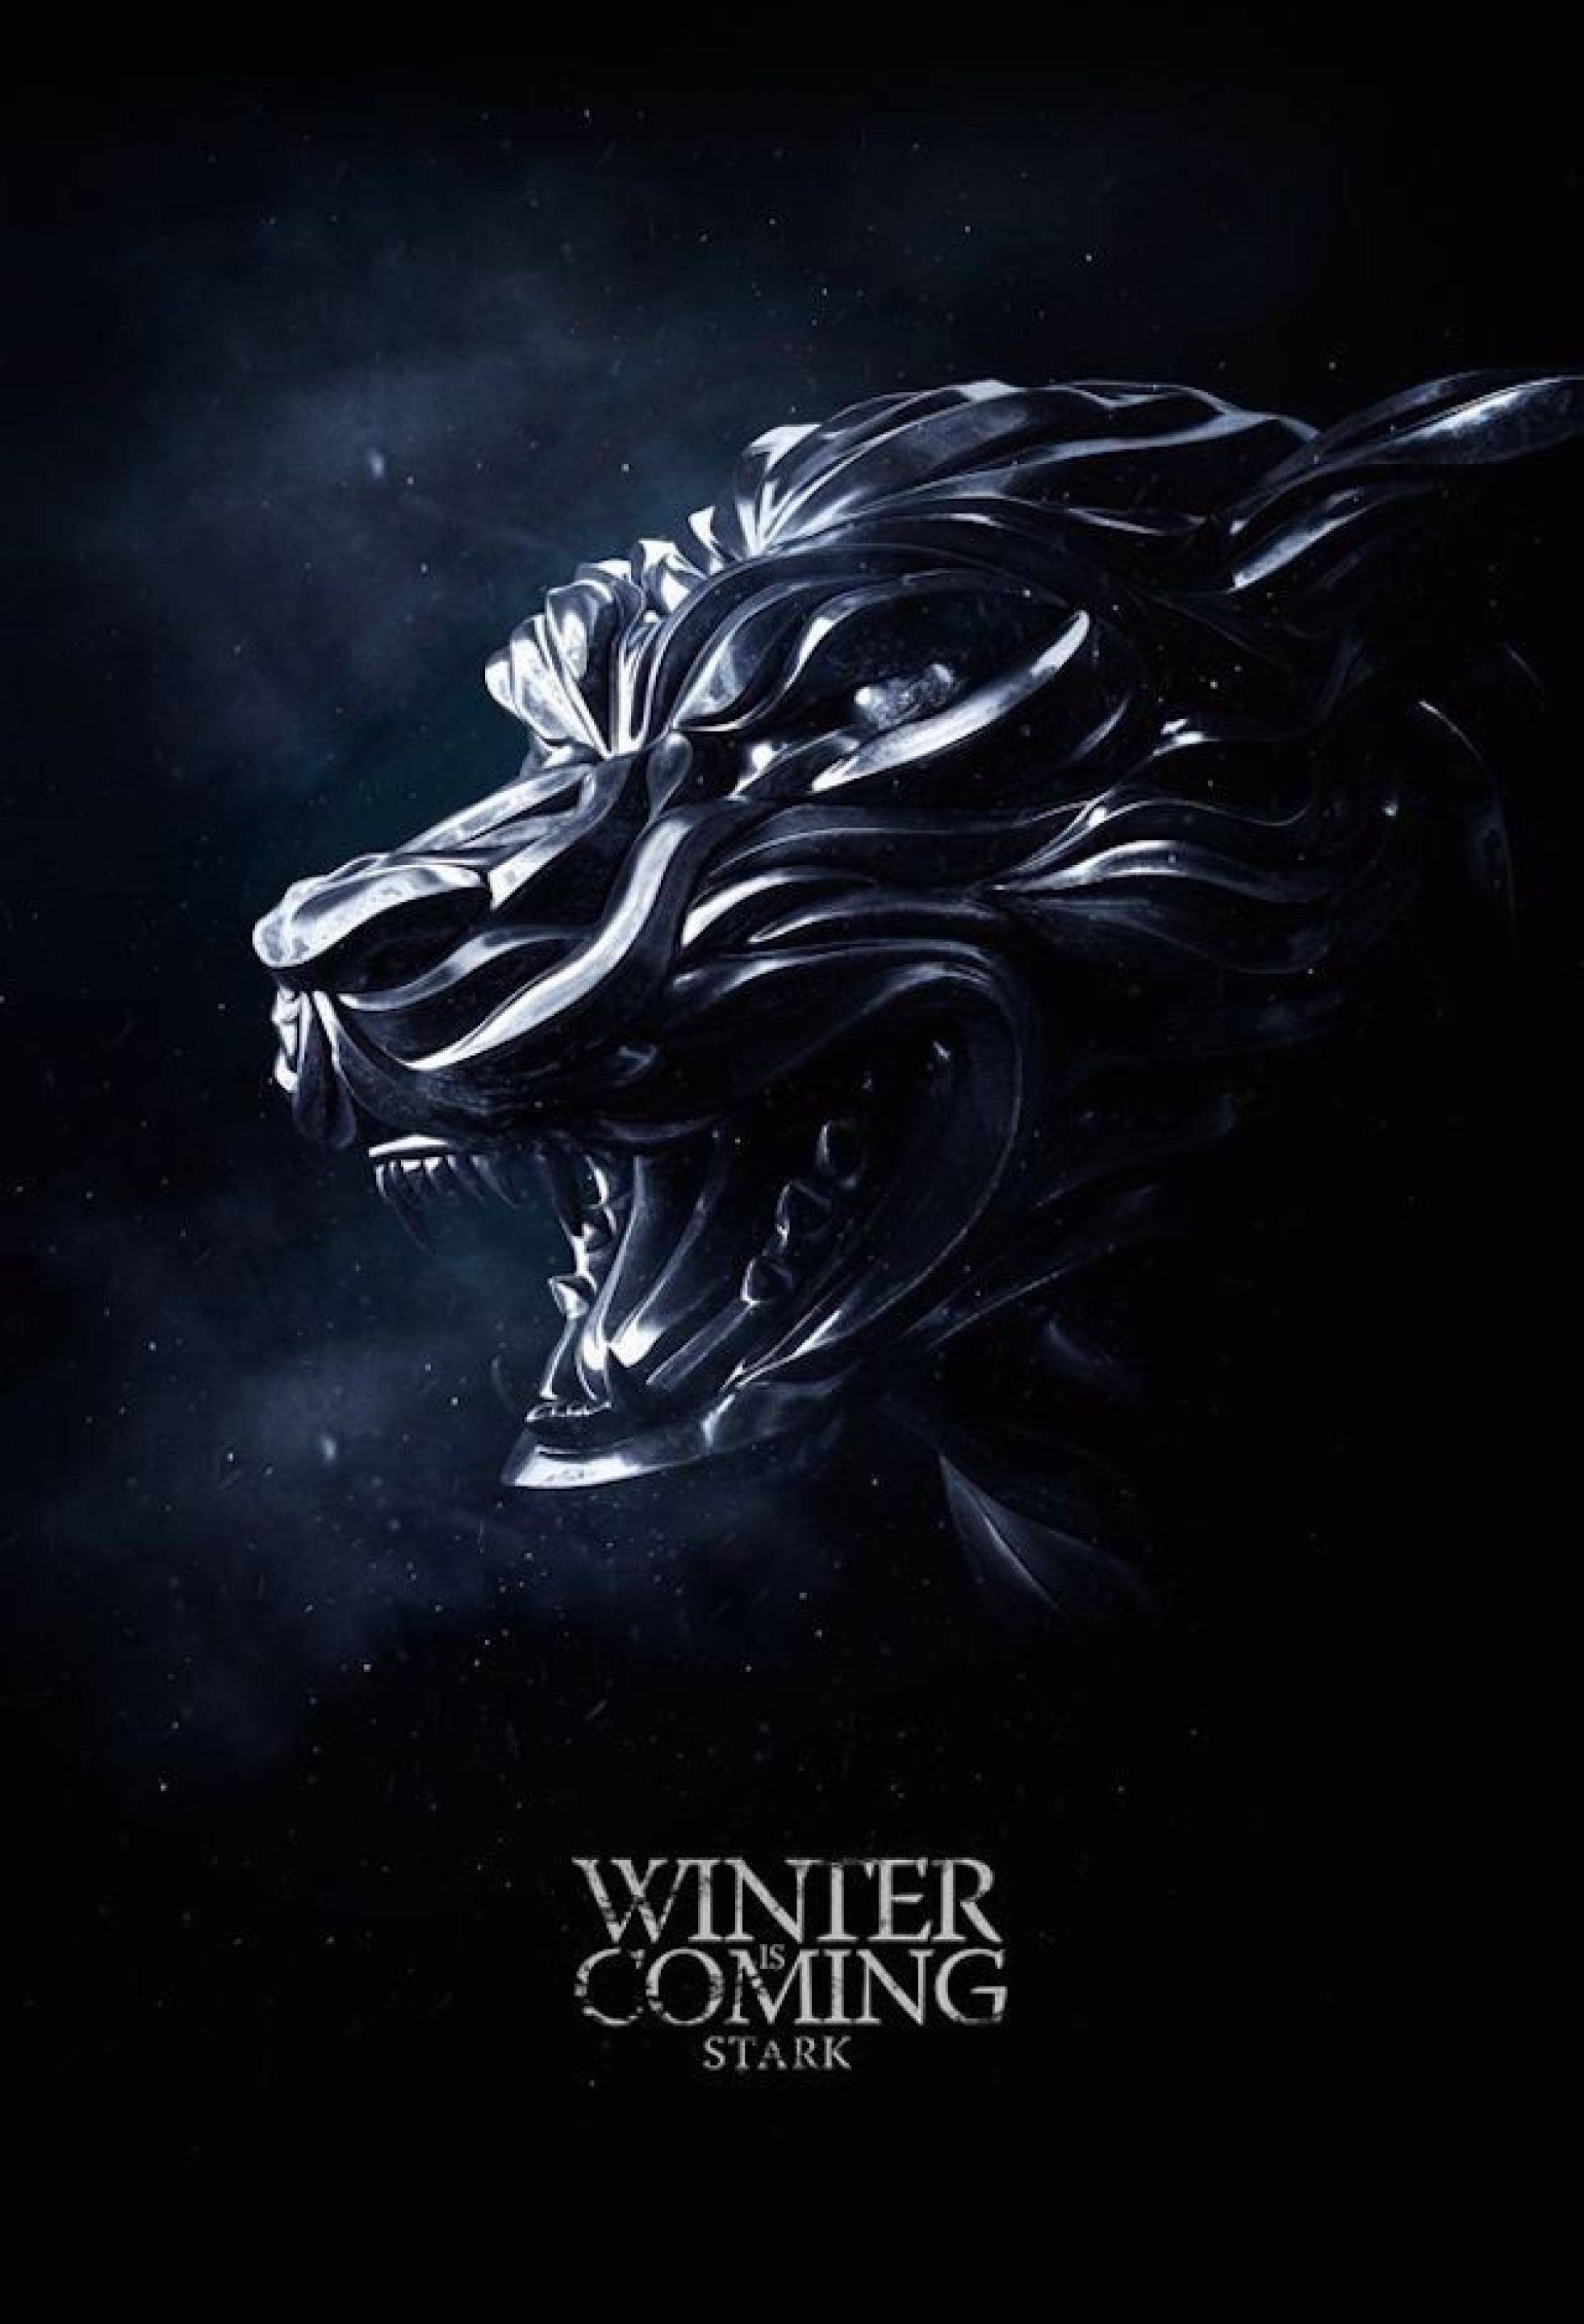 game of thrones hd wallpapers for mobile,hand,finger,performance,photography,music  (#476875) - WallpaperUse